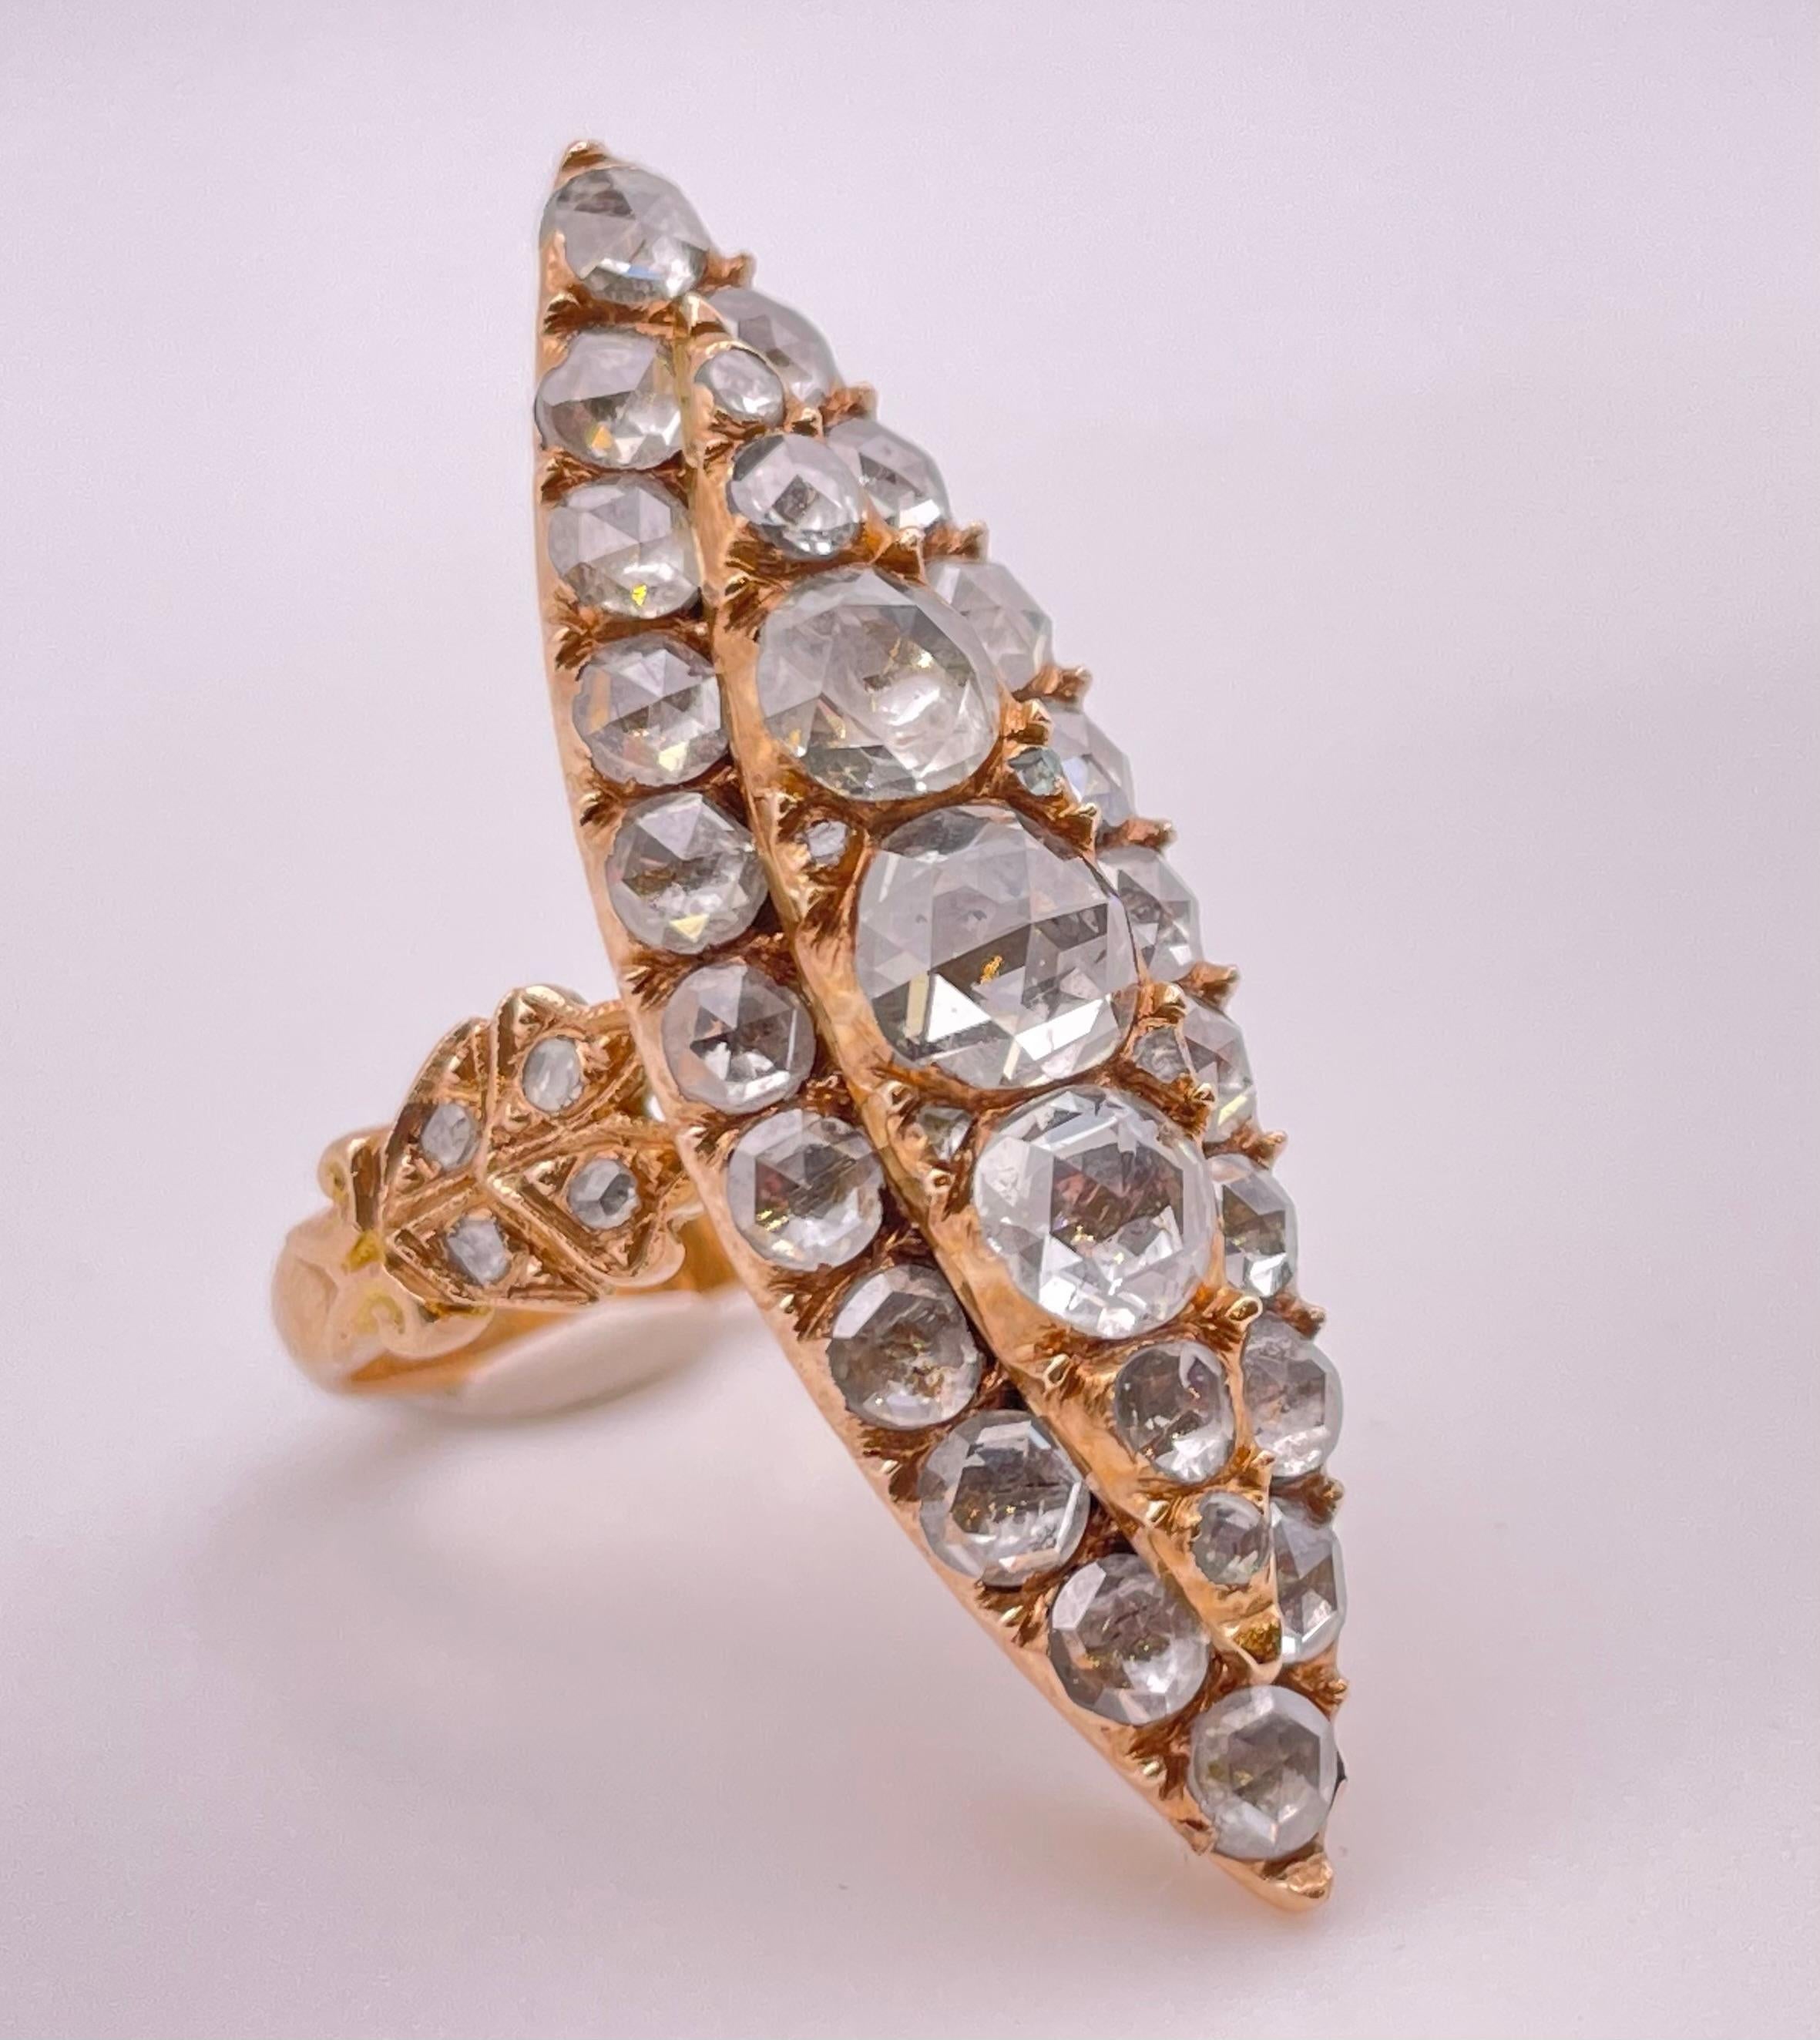 Early 20th century Syrian rose cut diamond ring in navette style with an estimate diamond weight approximately 4.5 carats , approximately I , clarity VS/SI .
This unique ring made early 20th century in Aleppo .